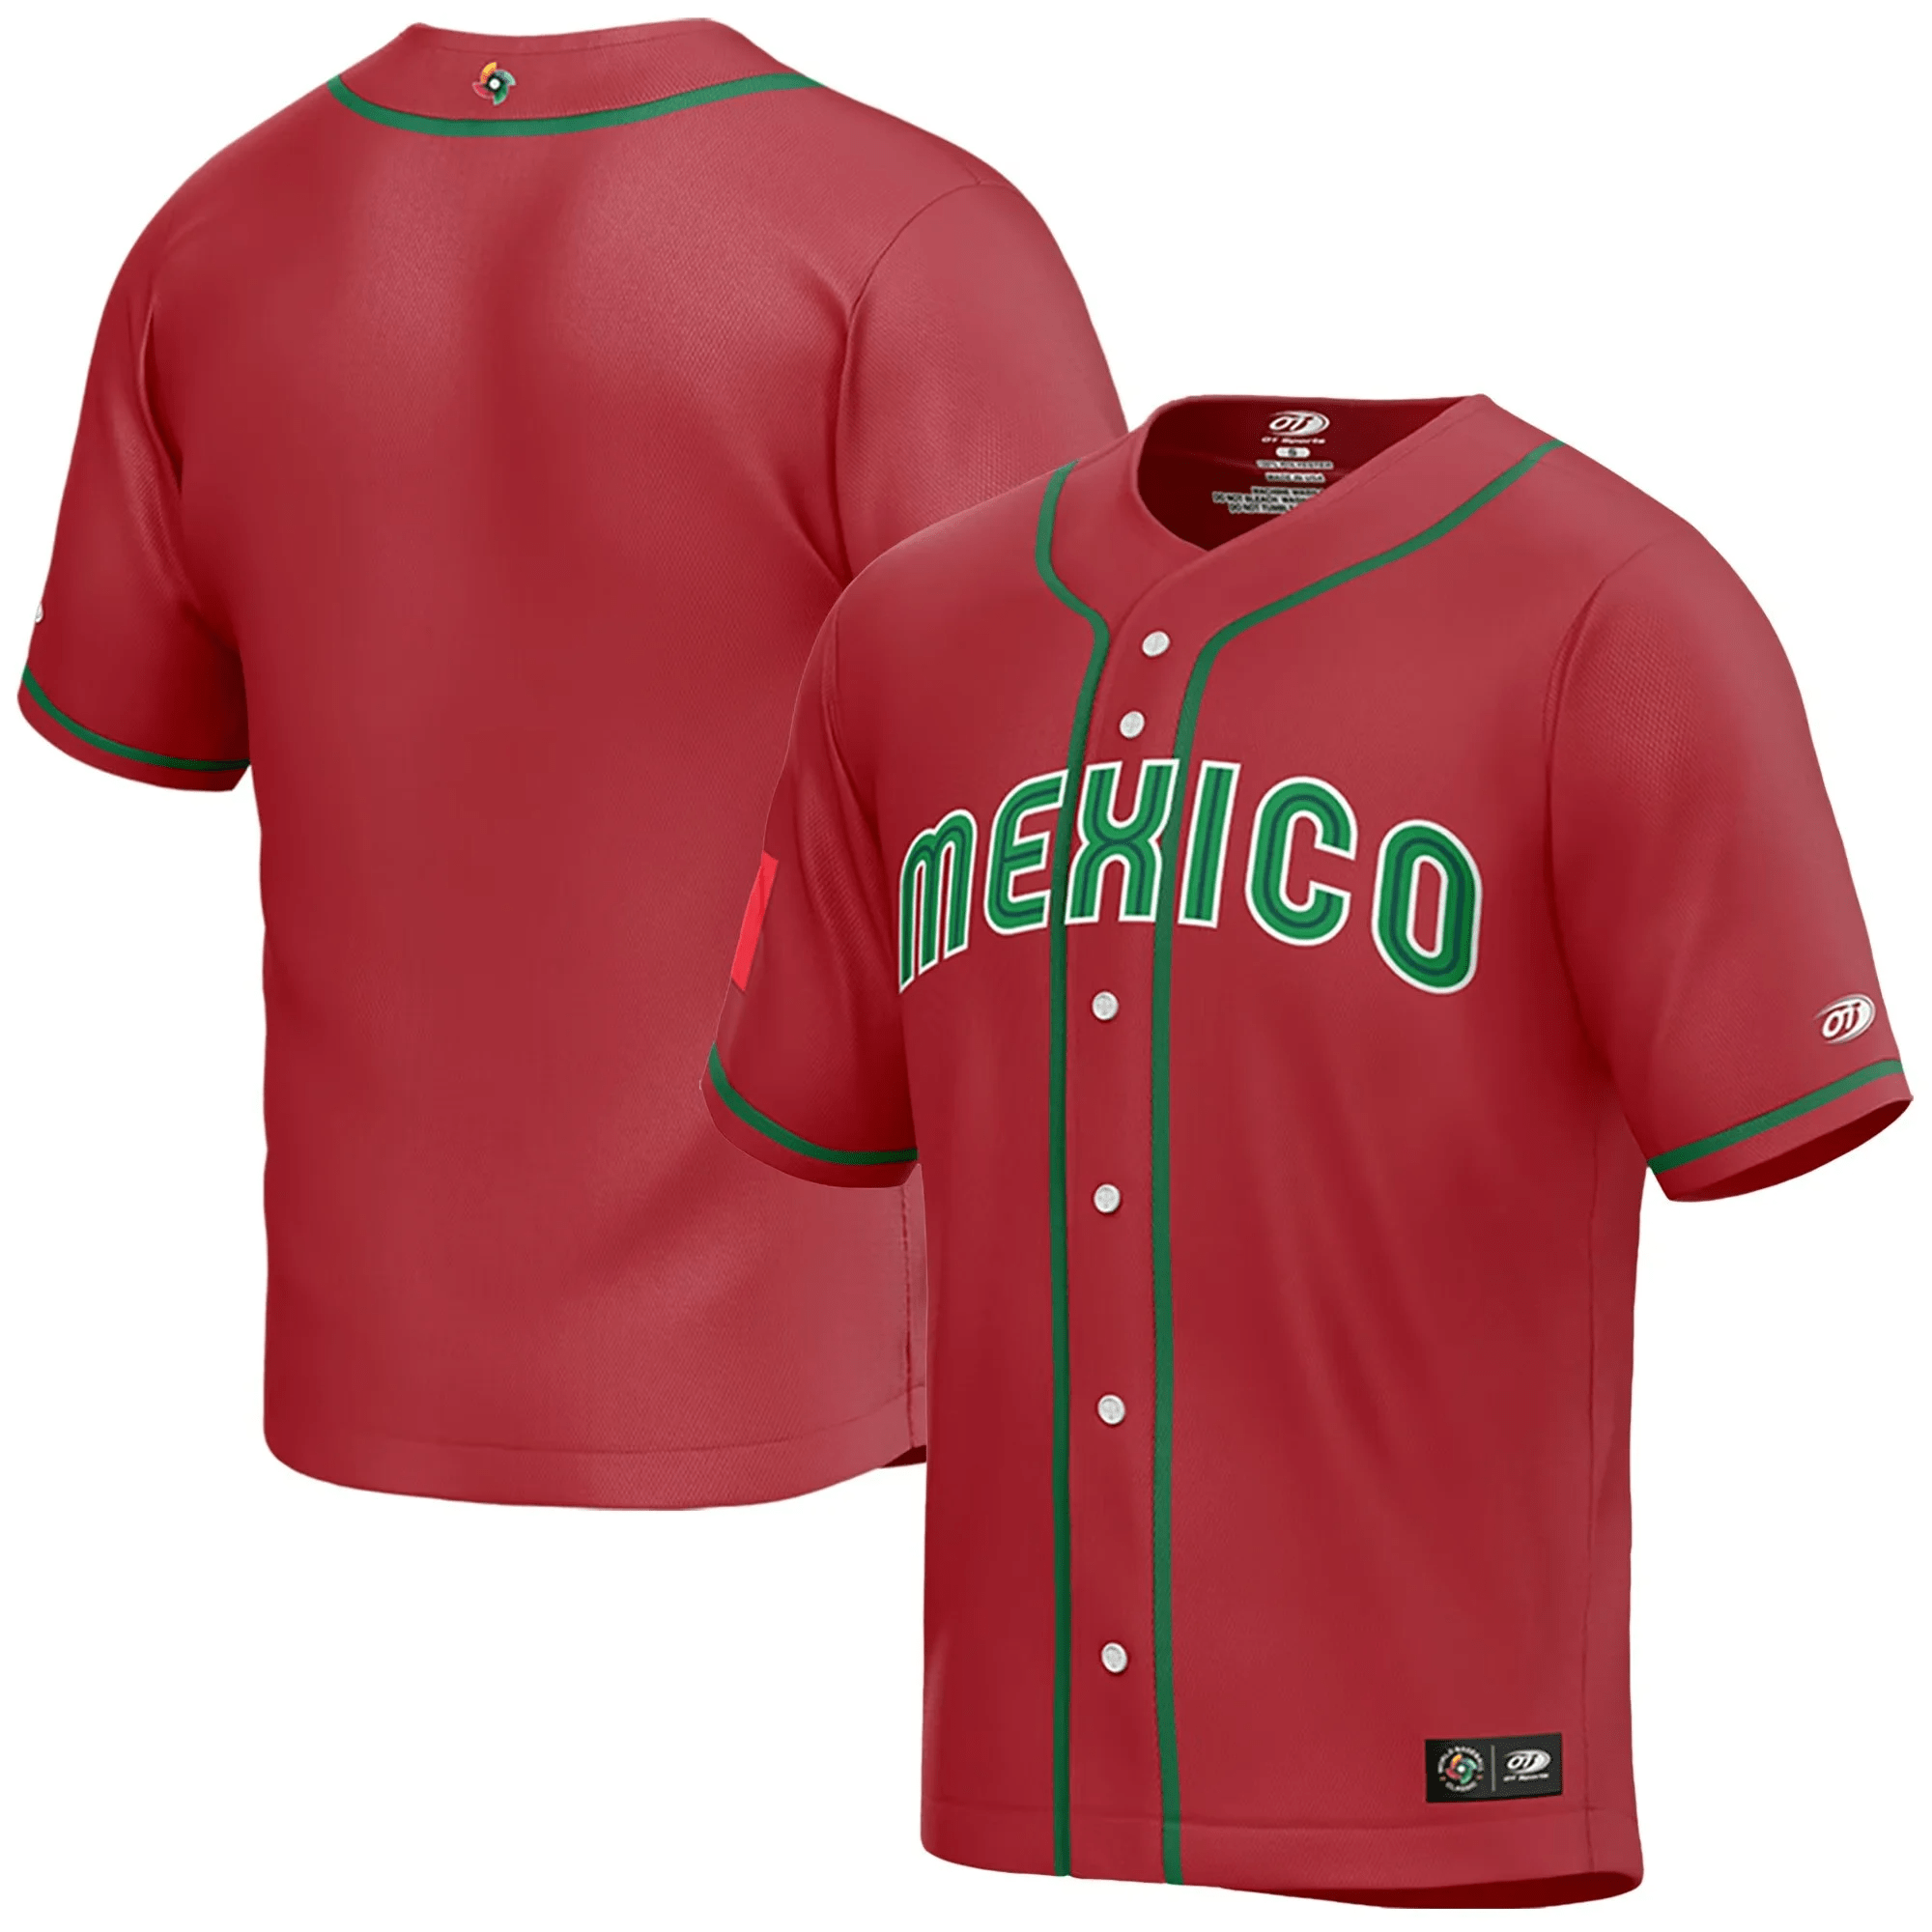 Texas Rangers Mexican Custom Jersey V3 - All Stitched - Vgear